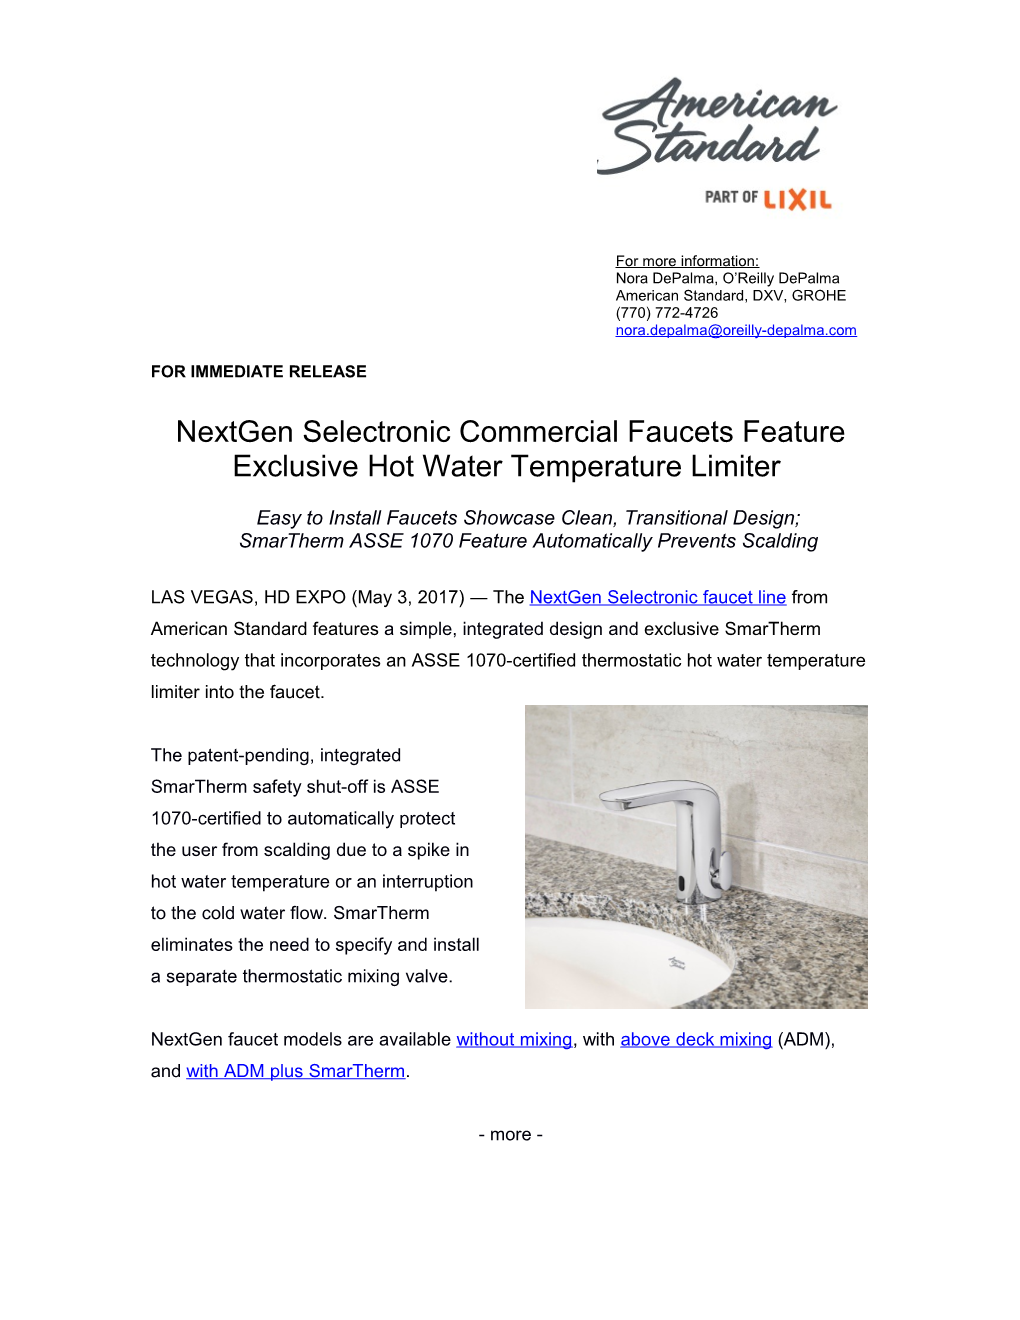 Nextgen Selectronic Commercial Faucets Feature Exclusive Hot Water Temperature Limiter1-1-1